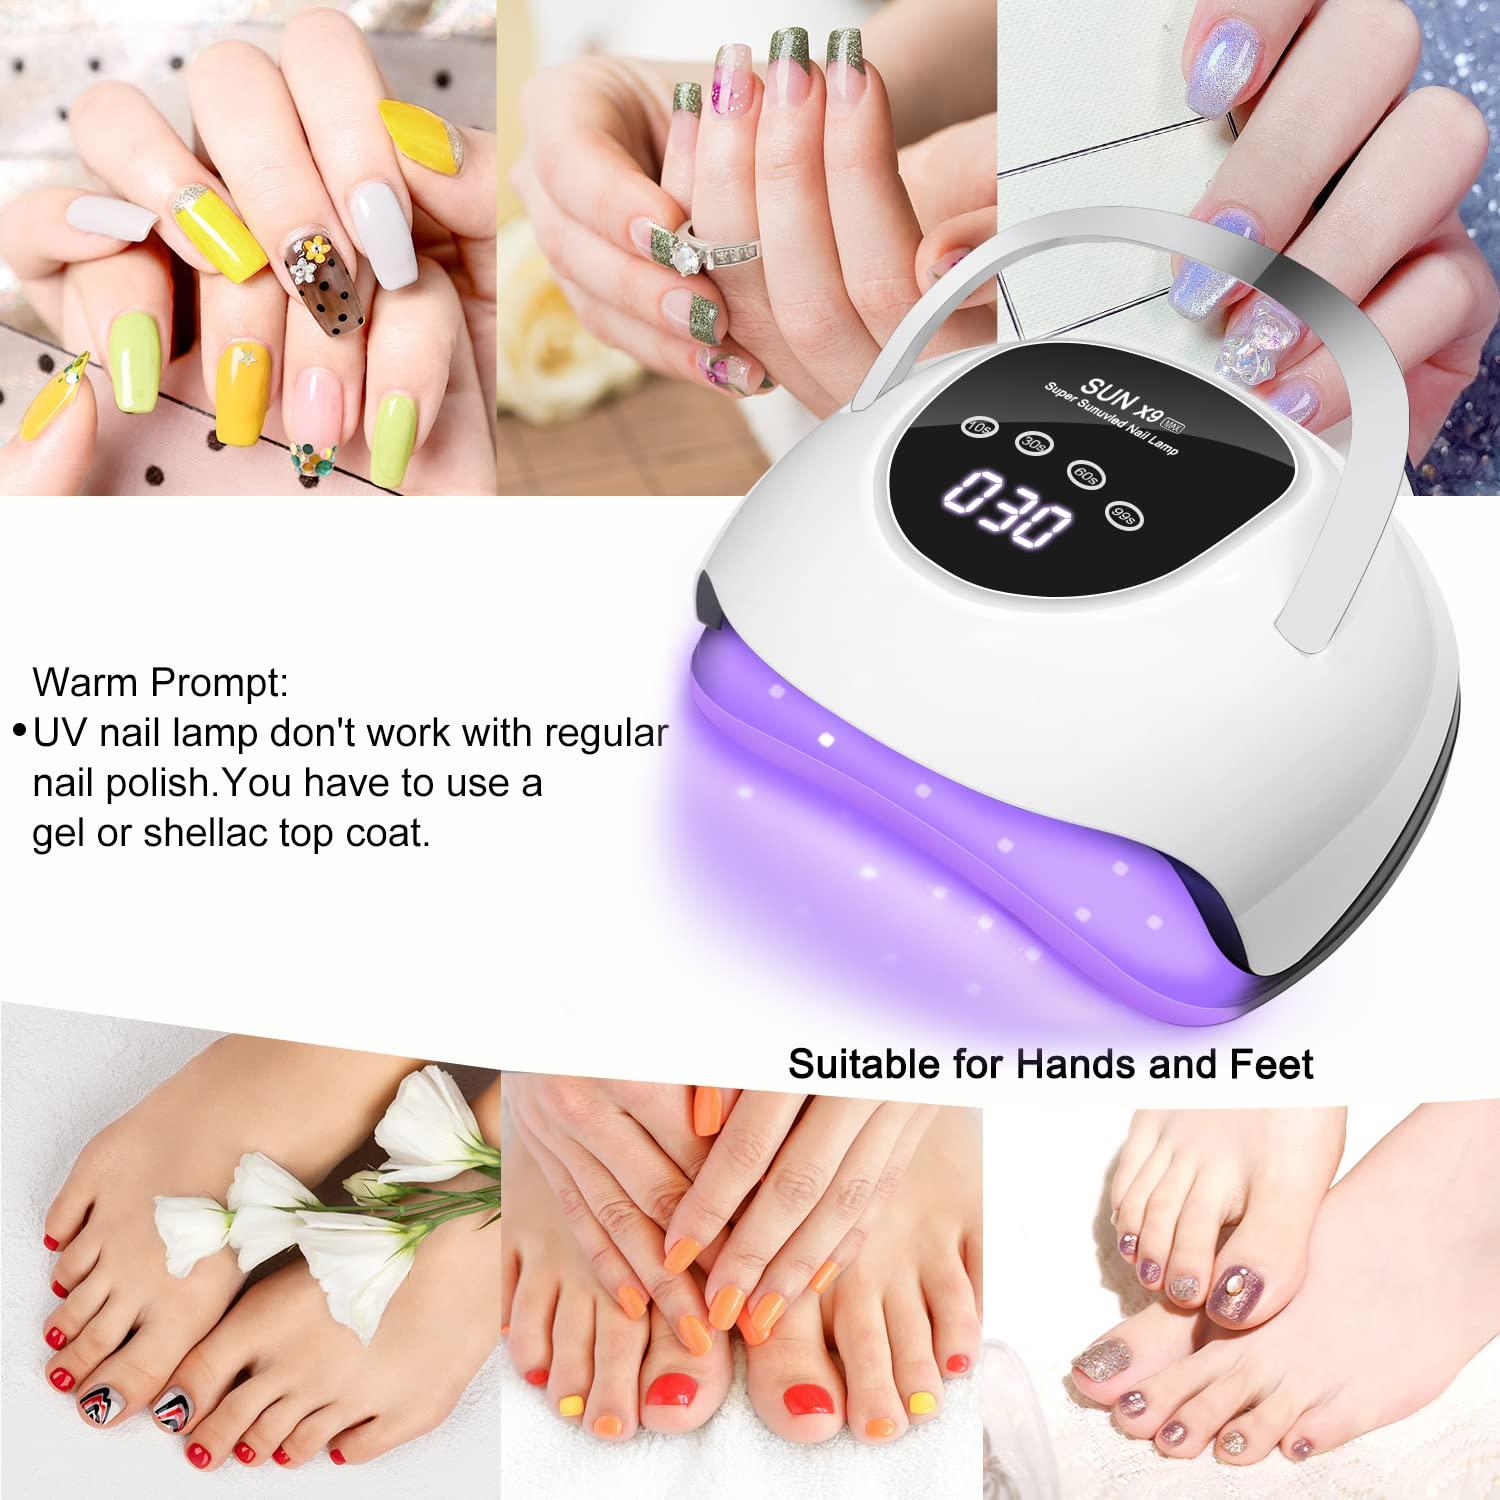 UV LED Nail Lamp 220W LED Lamp Gel Nails Fast Curing Nail Dryer with 57pcs Lamp Beads 4 Timers Professional Gel UV Light for Nails Home Salon Nail Art Tools